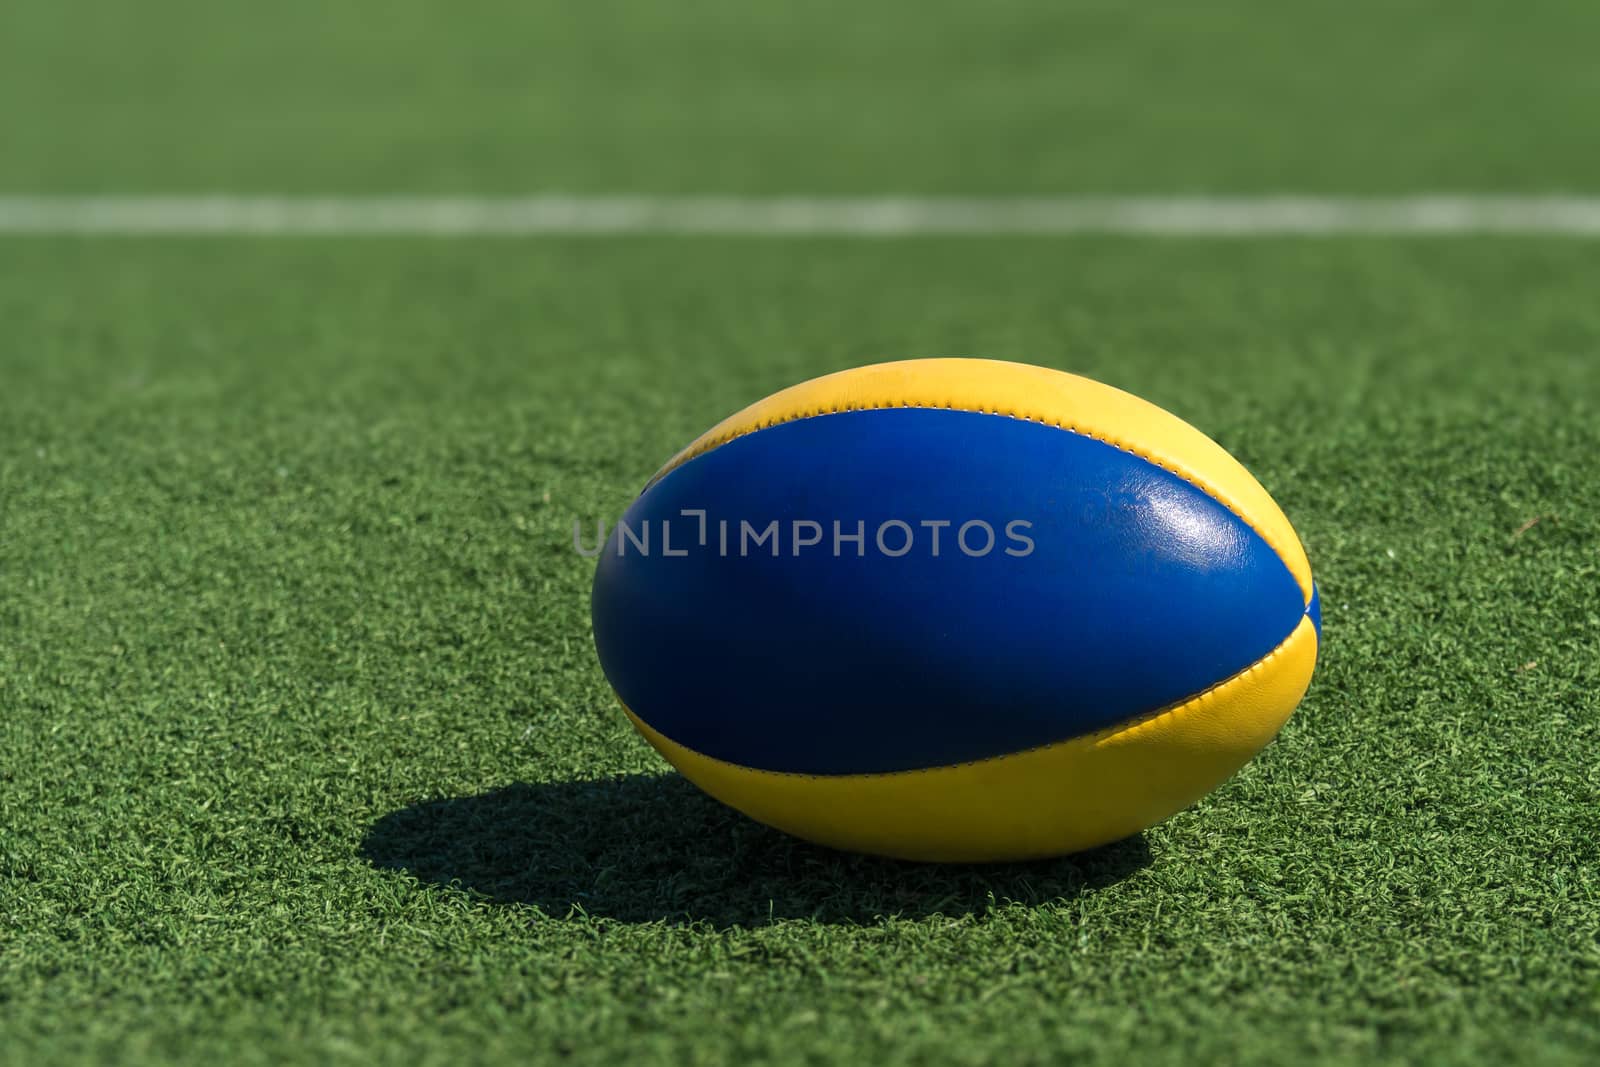 A rugby ball on a synthetic grass in front of the white line.